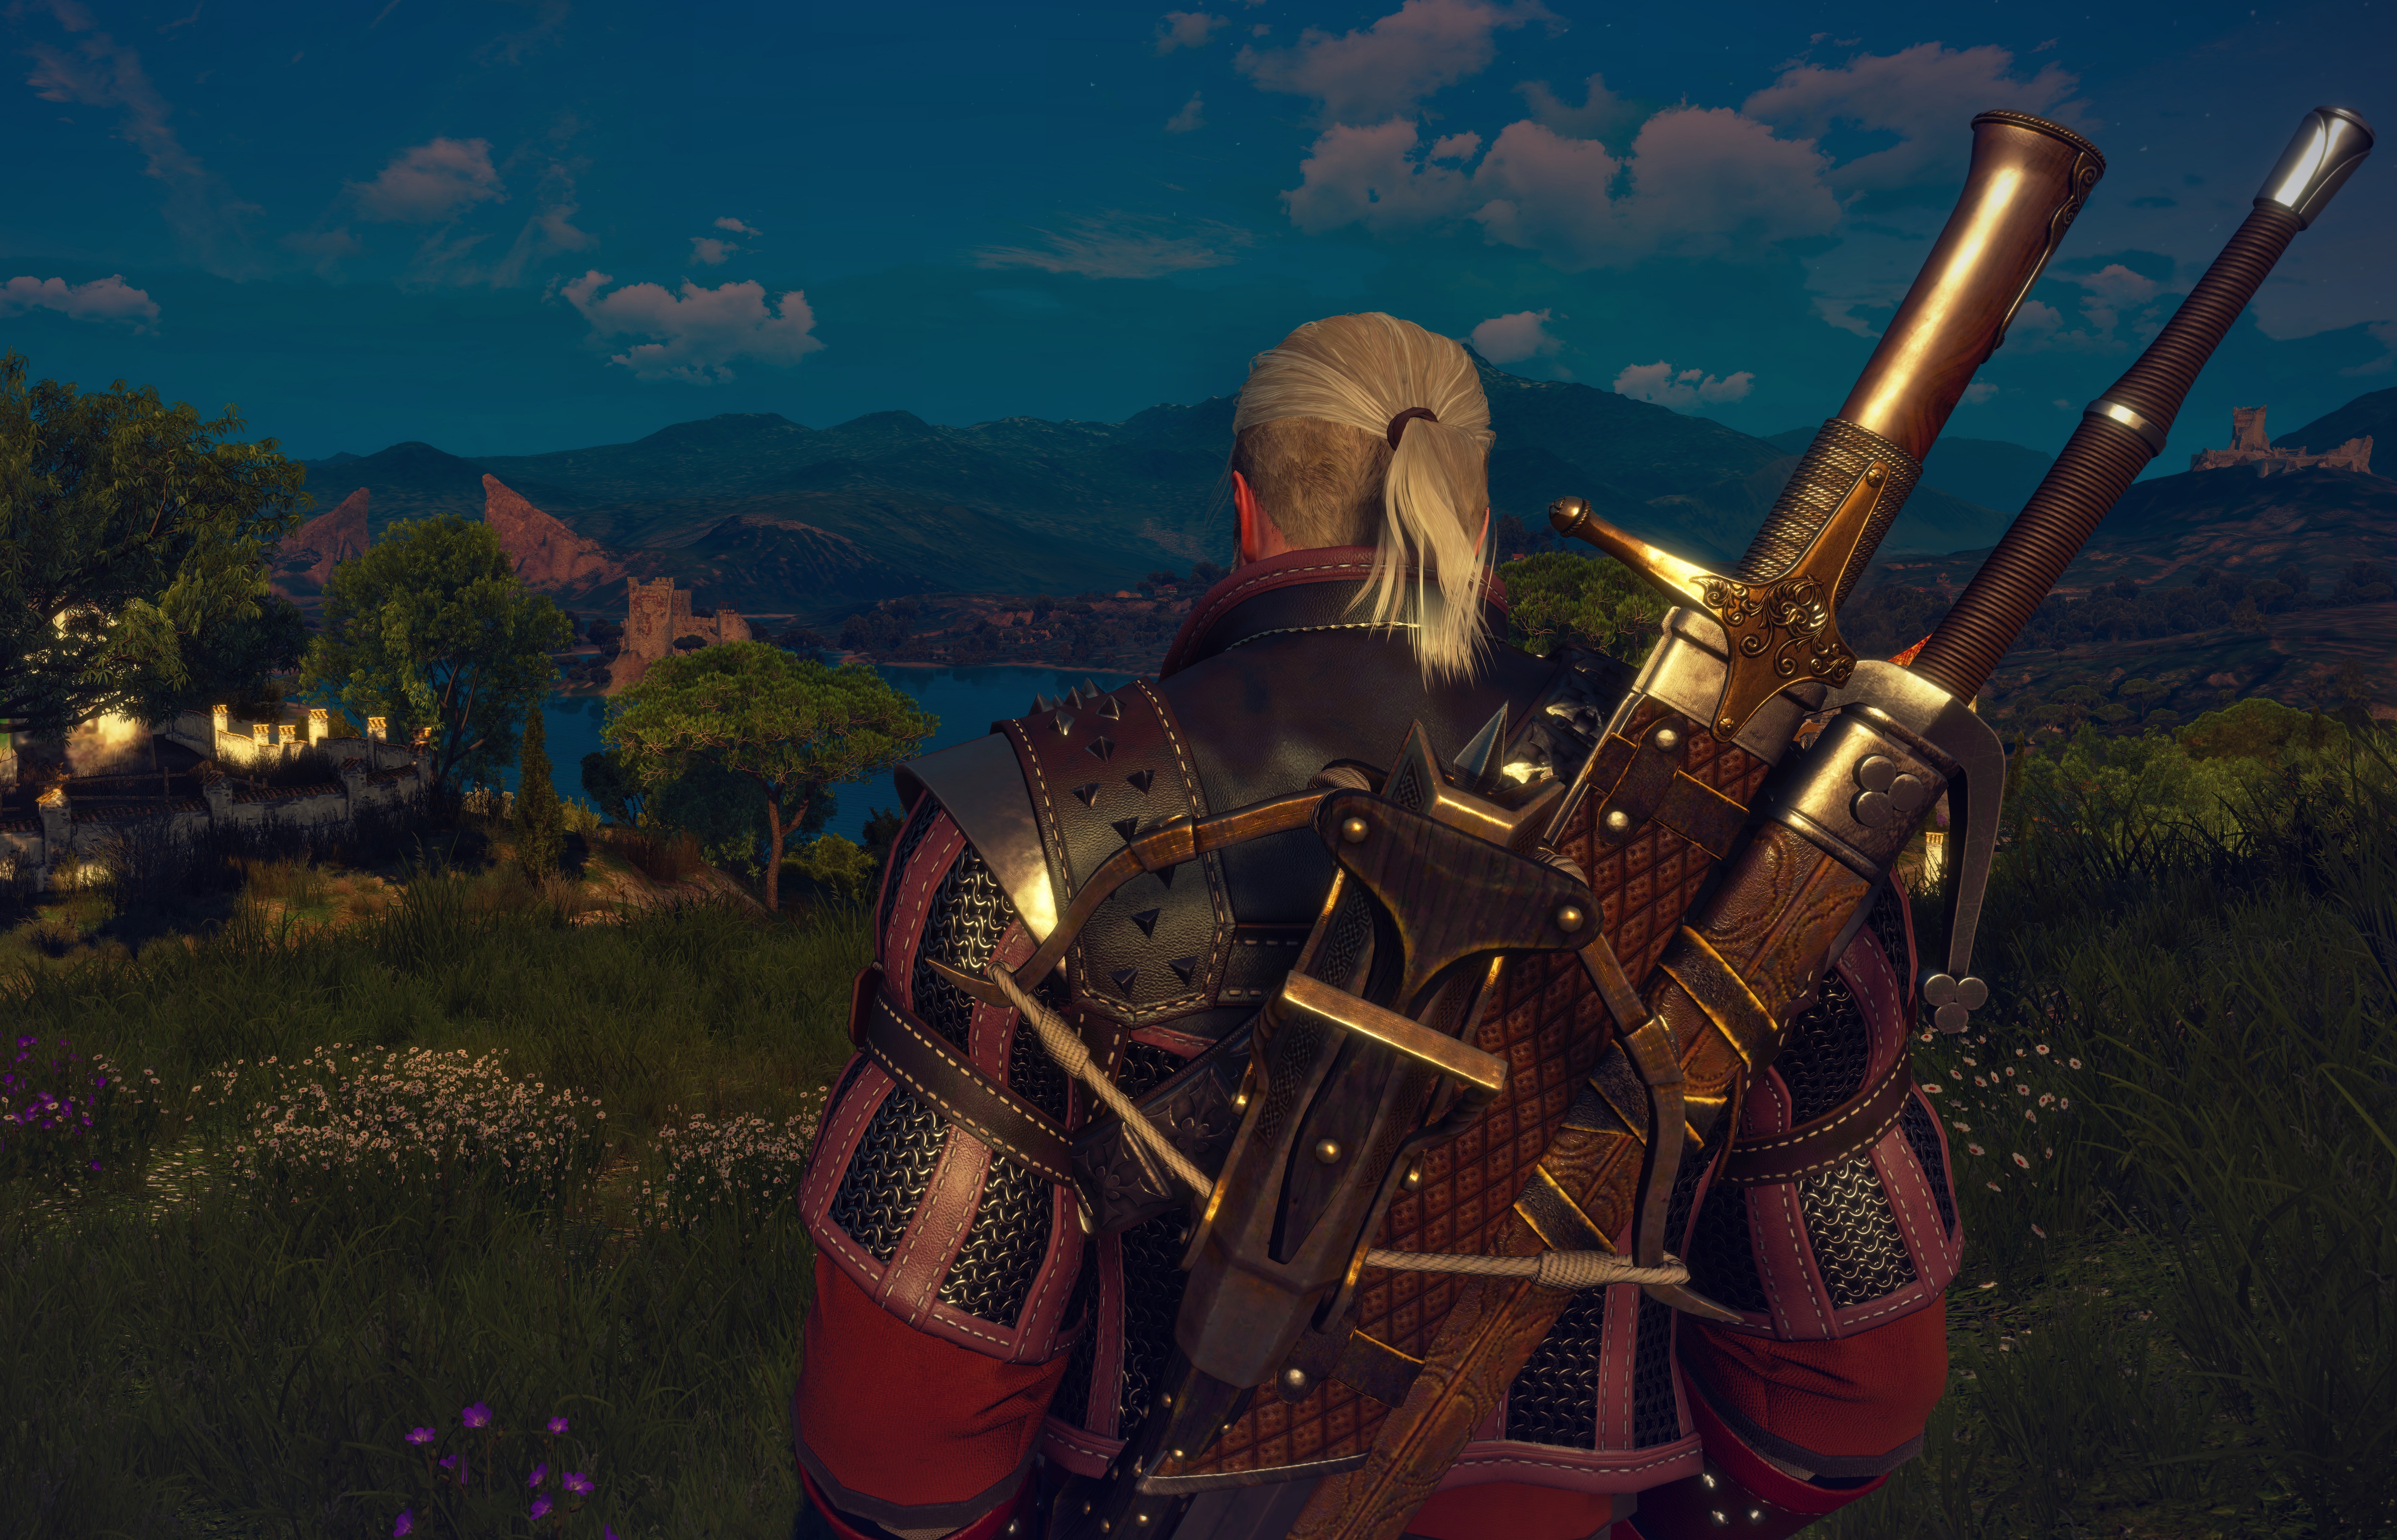 General 8510x5468 The Witcher 3: Wild Hunt Geralt of Rivia Nvidia Ansel The Witcher 3: Wild Hunt - Blood and Wine video games PC gaming screen shot video game landscape RPG